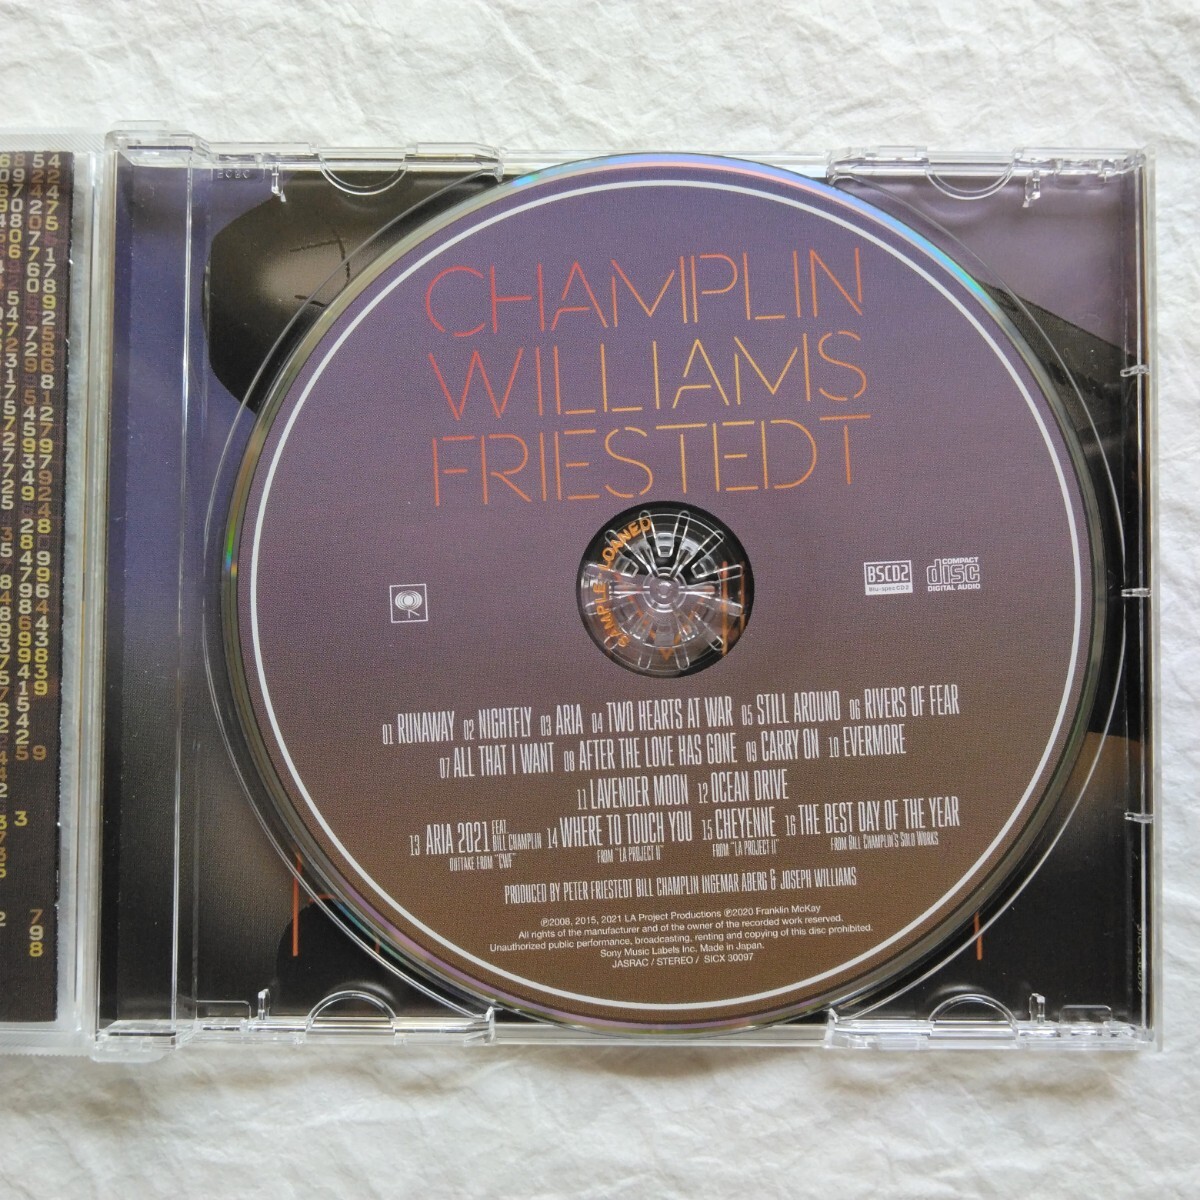 Champlin Williams Friestedt / CWF　国内盤帯付き_画像4